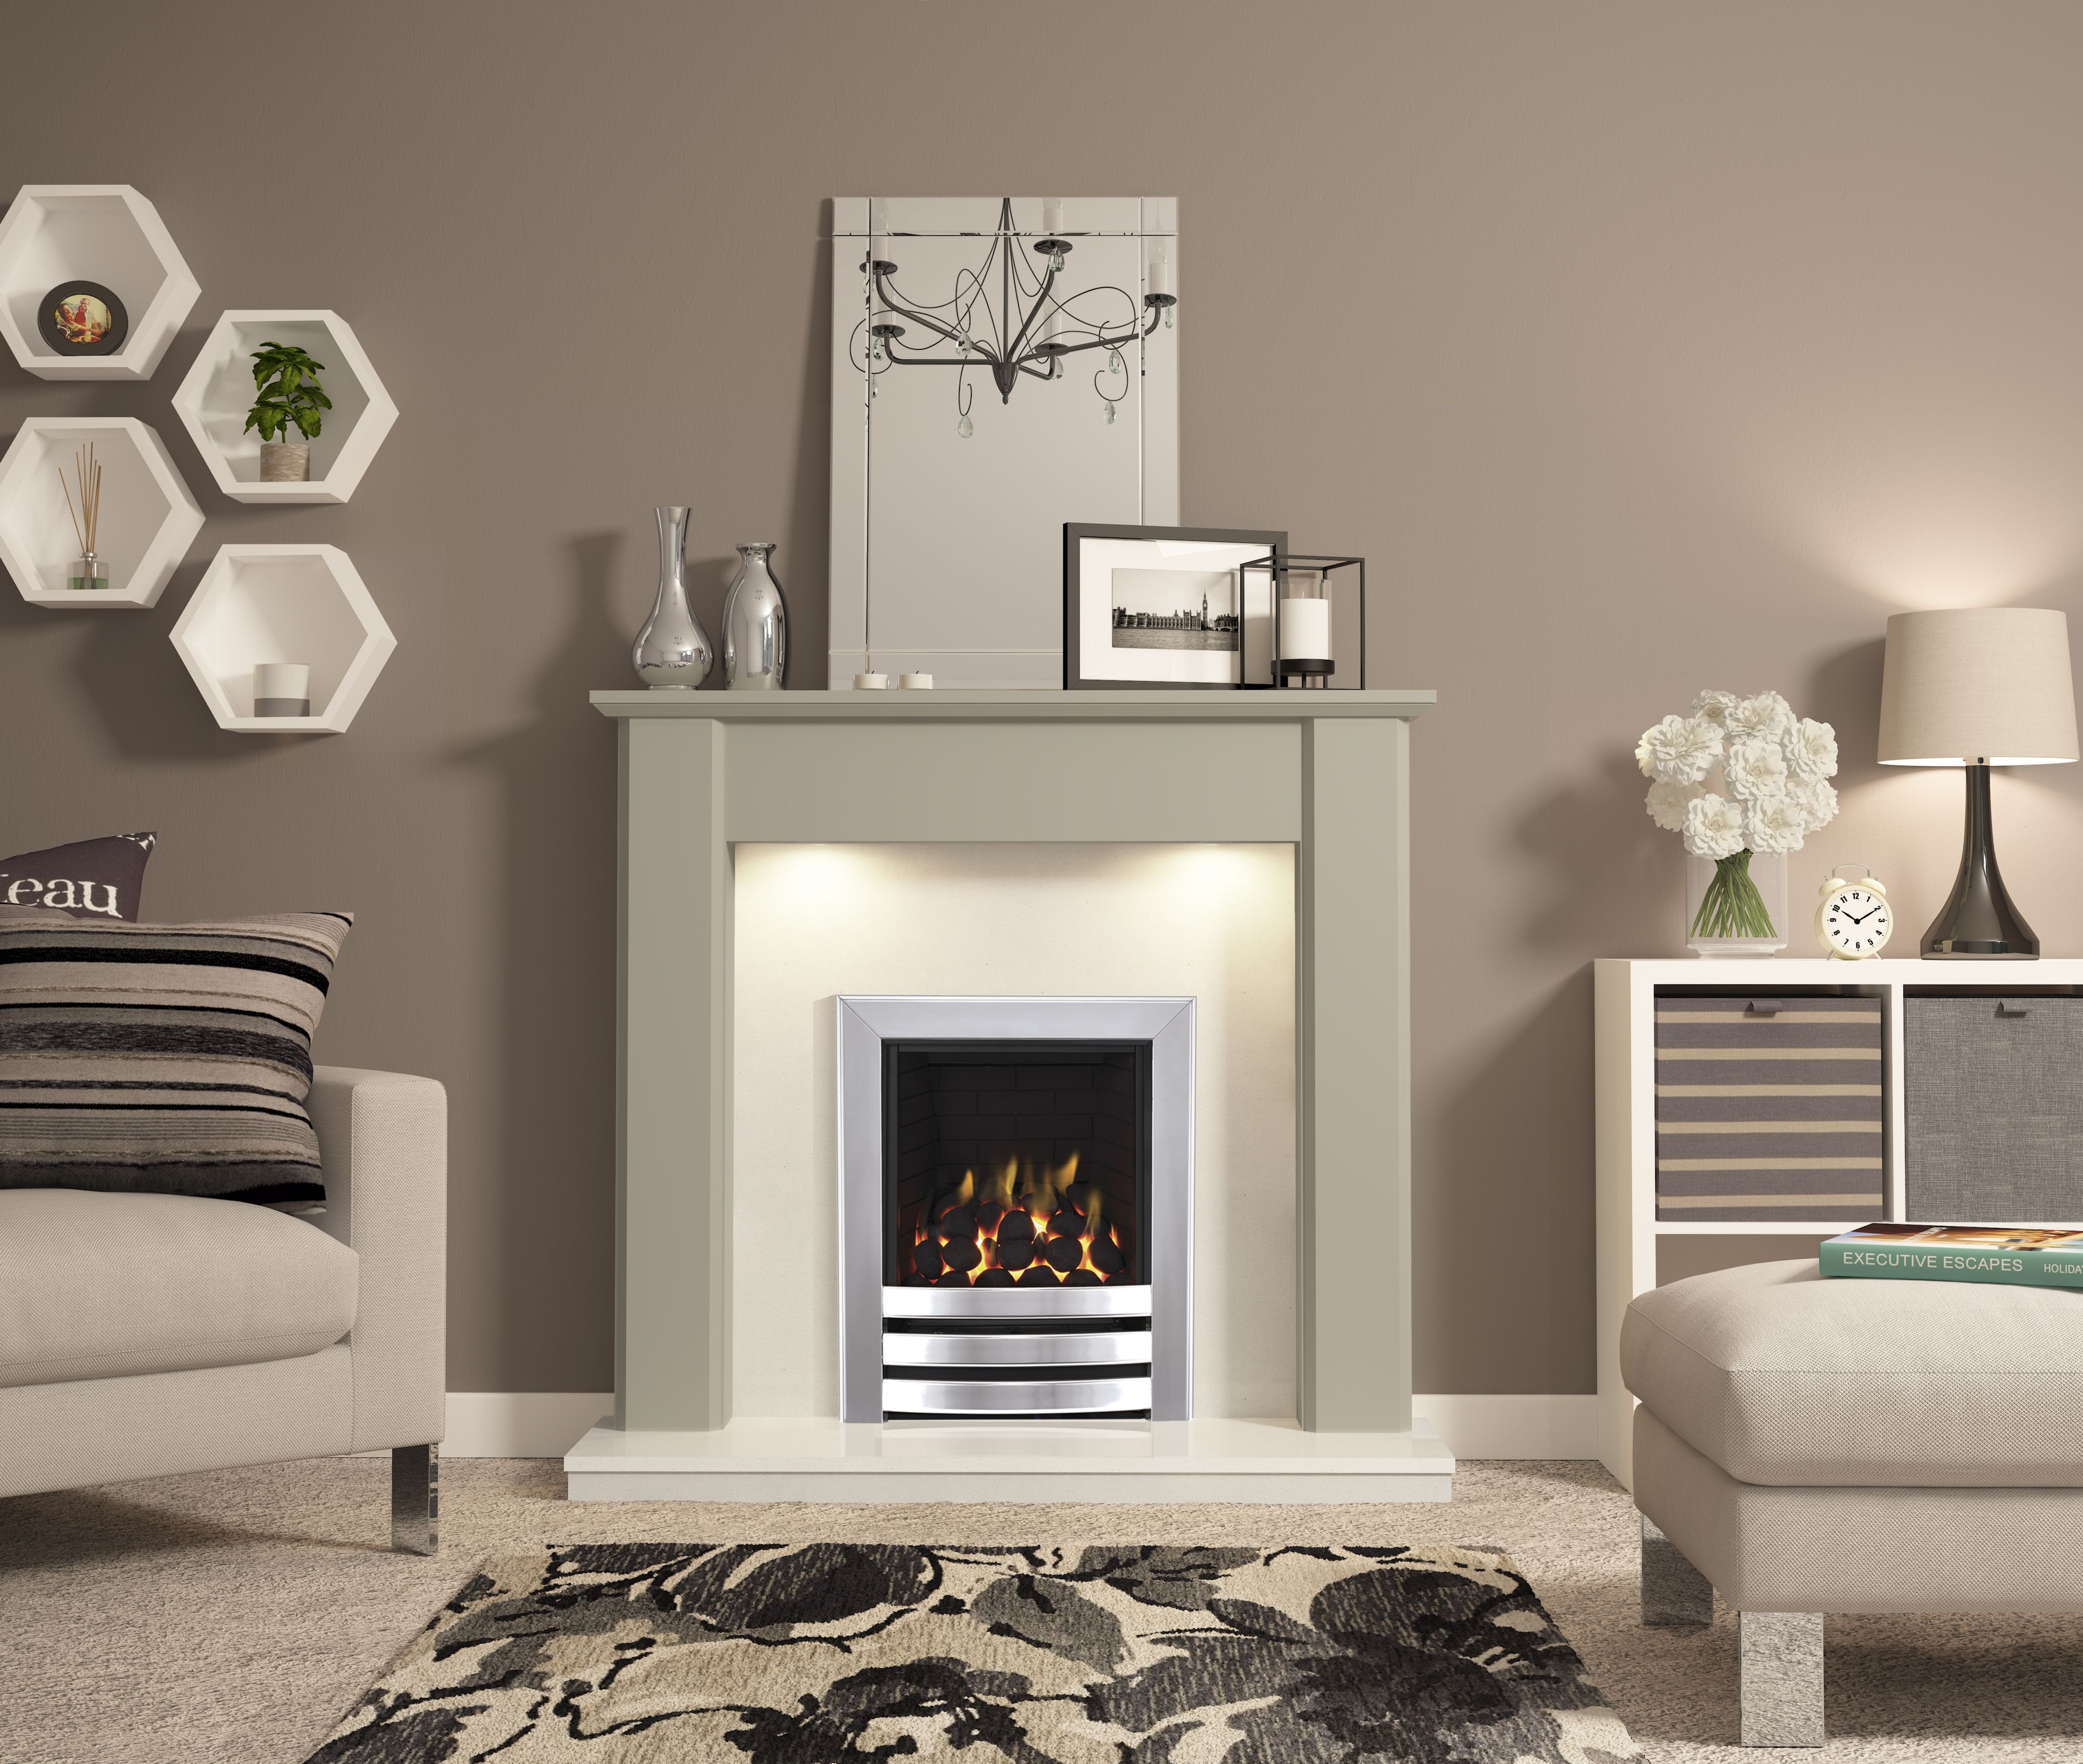 Be Modern Whitburn Stone Fire surround set with Lights included